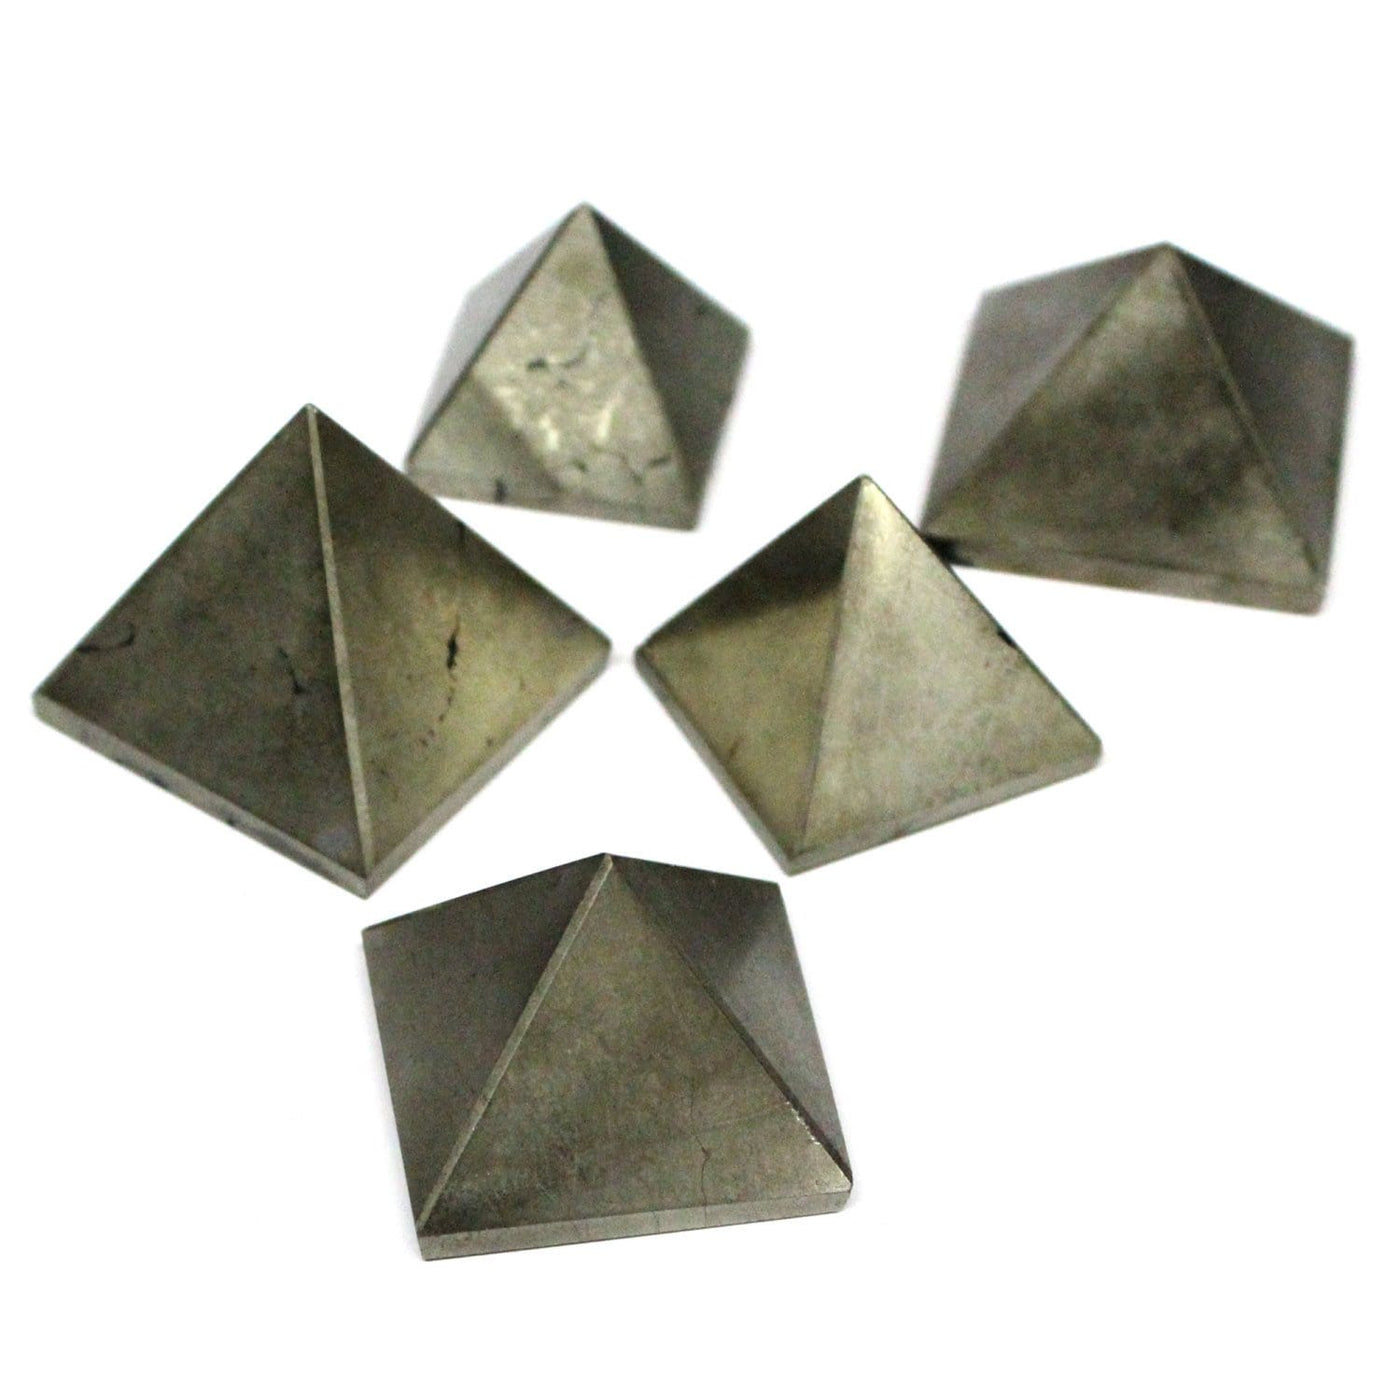 Angled view of view of five Pyrite shaped pyramids.